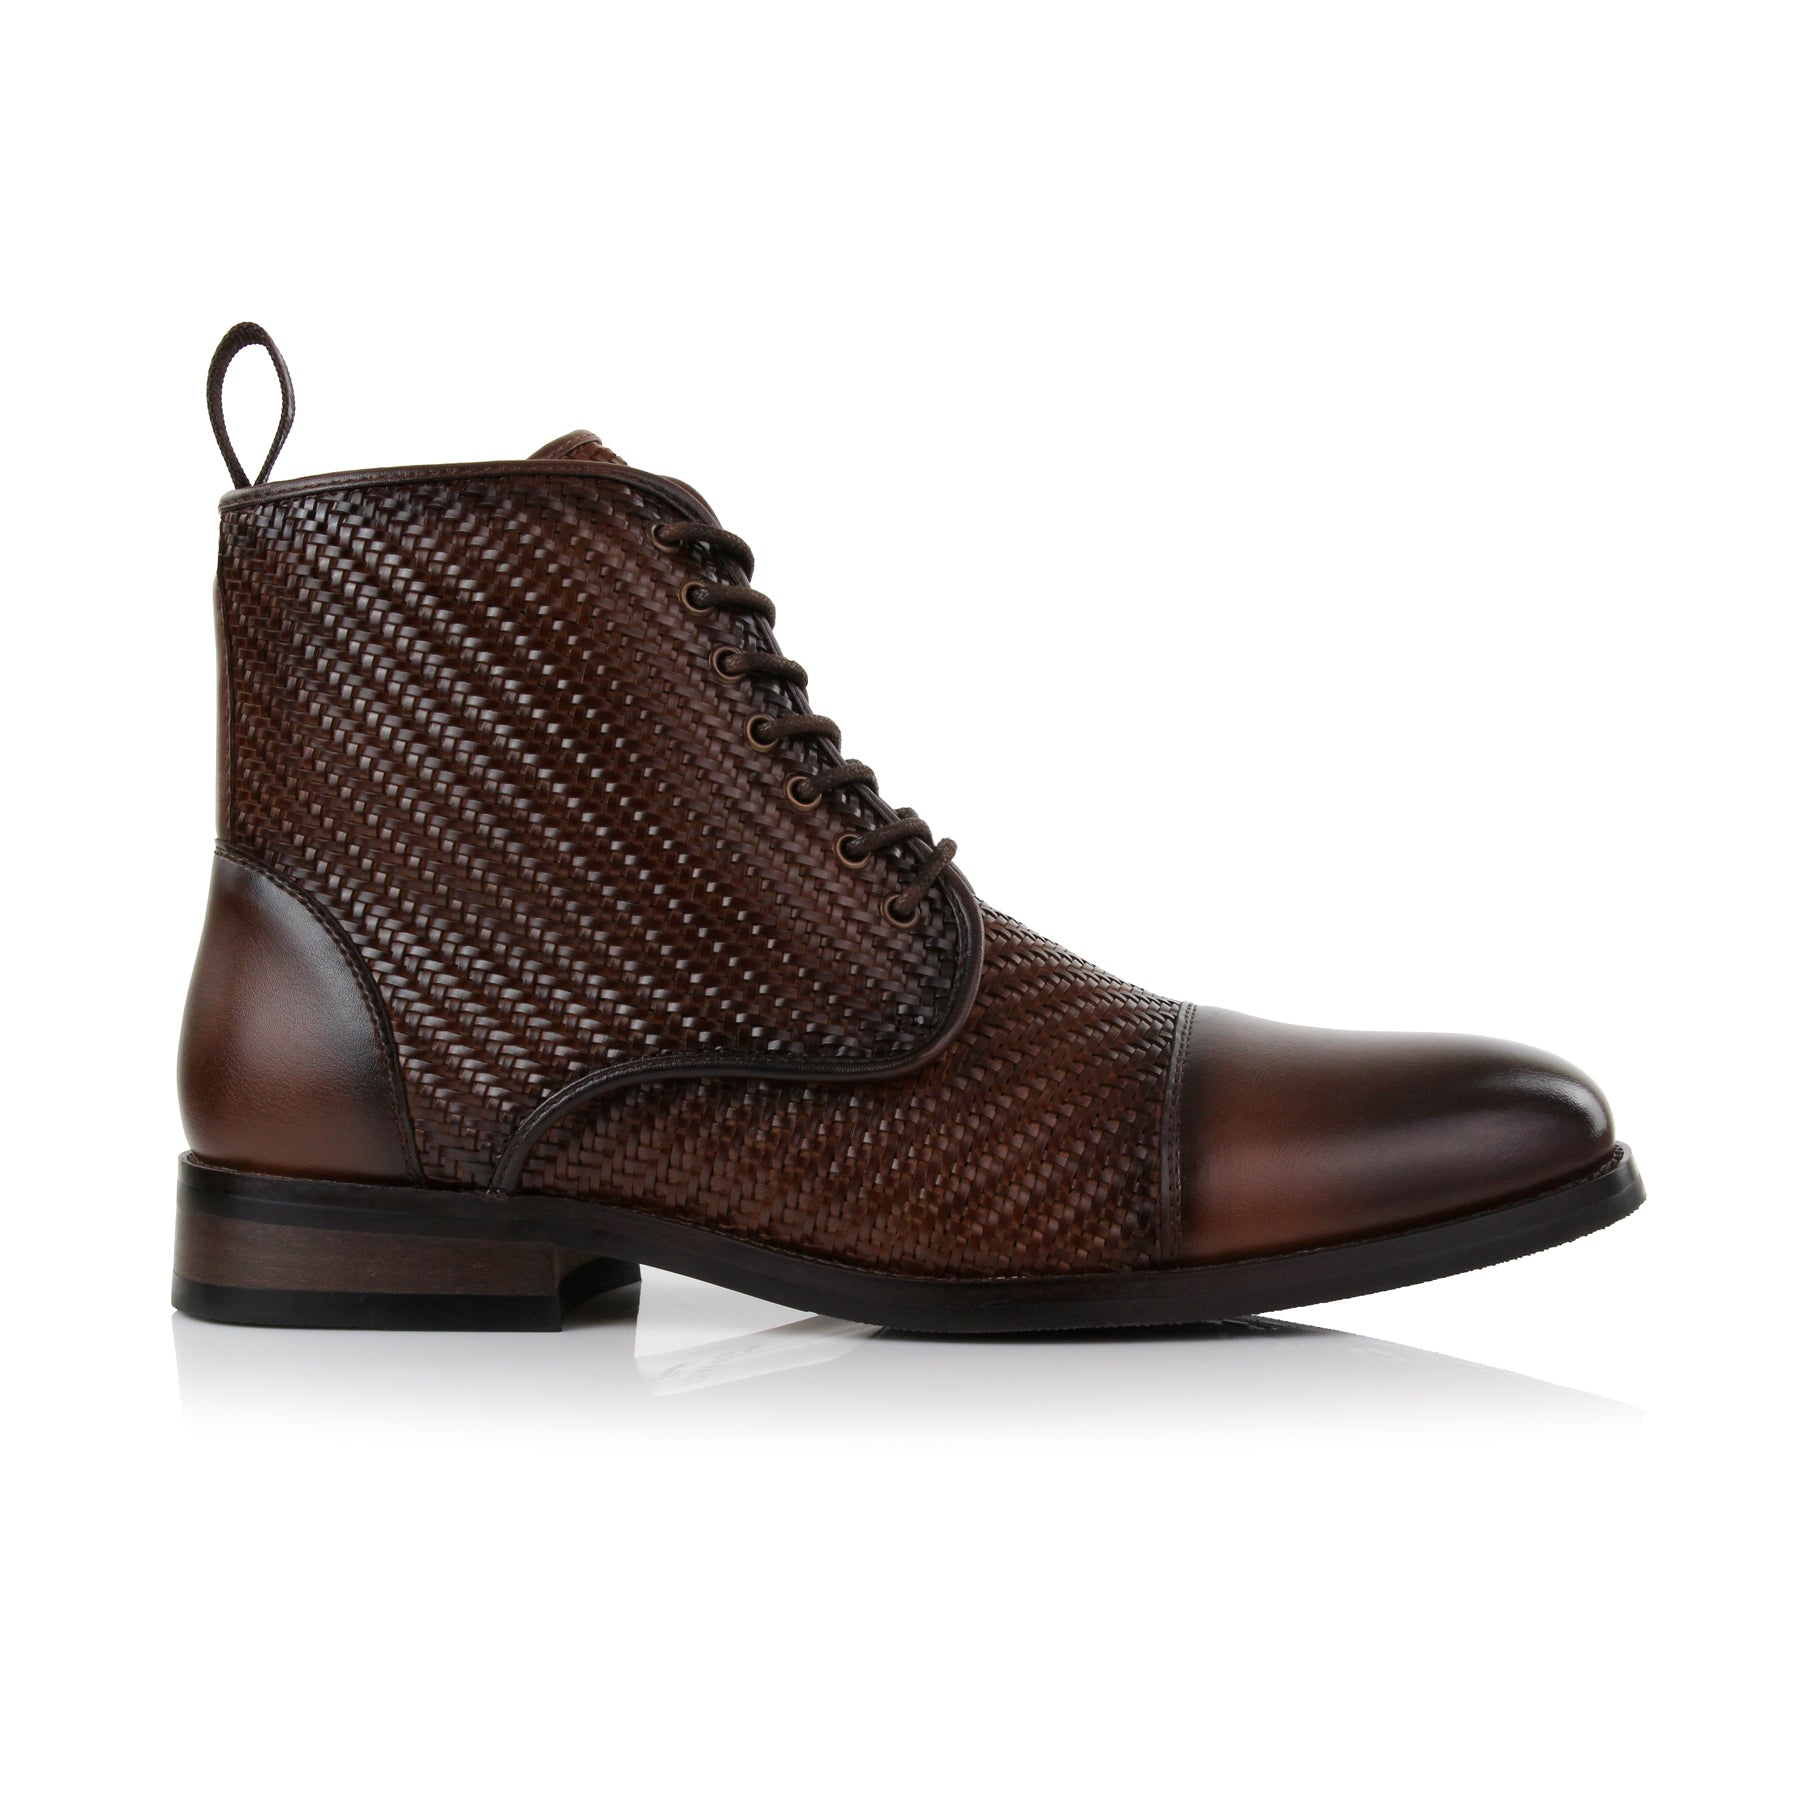 Woven High-Top Derby Boots | Brooke by Polar Fox | Conal Footwear | Outer Side Angle View